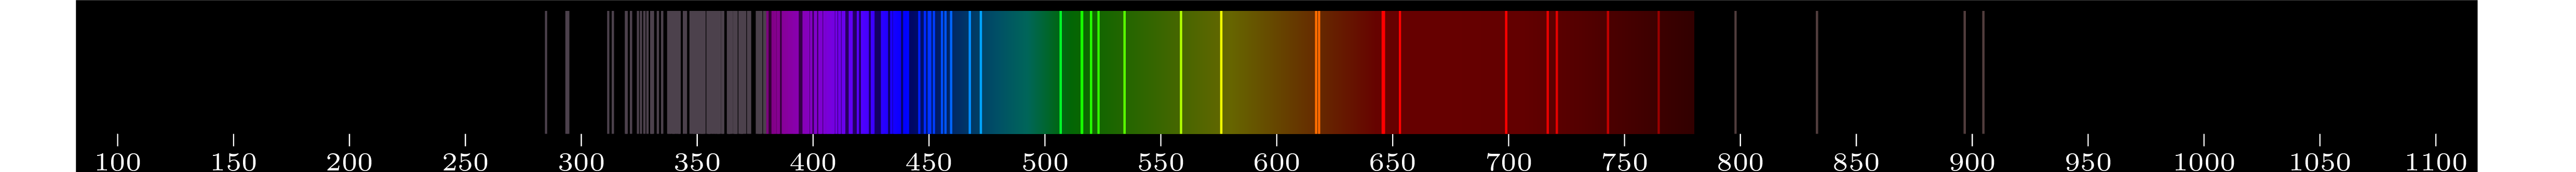 emmision spectra of element Th